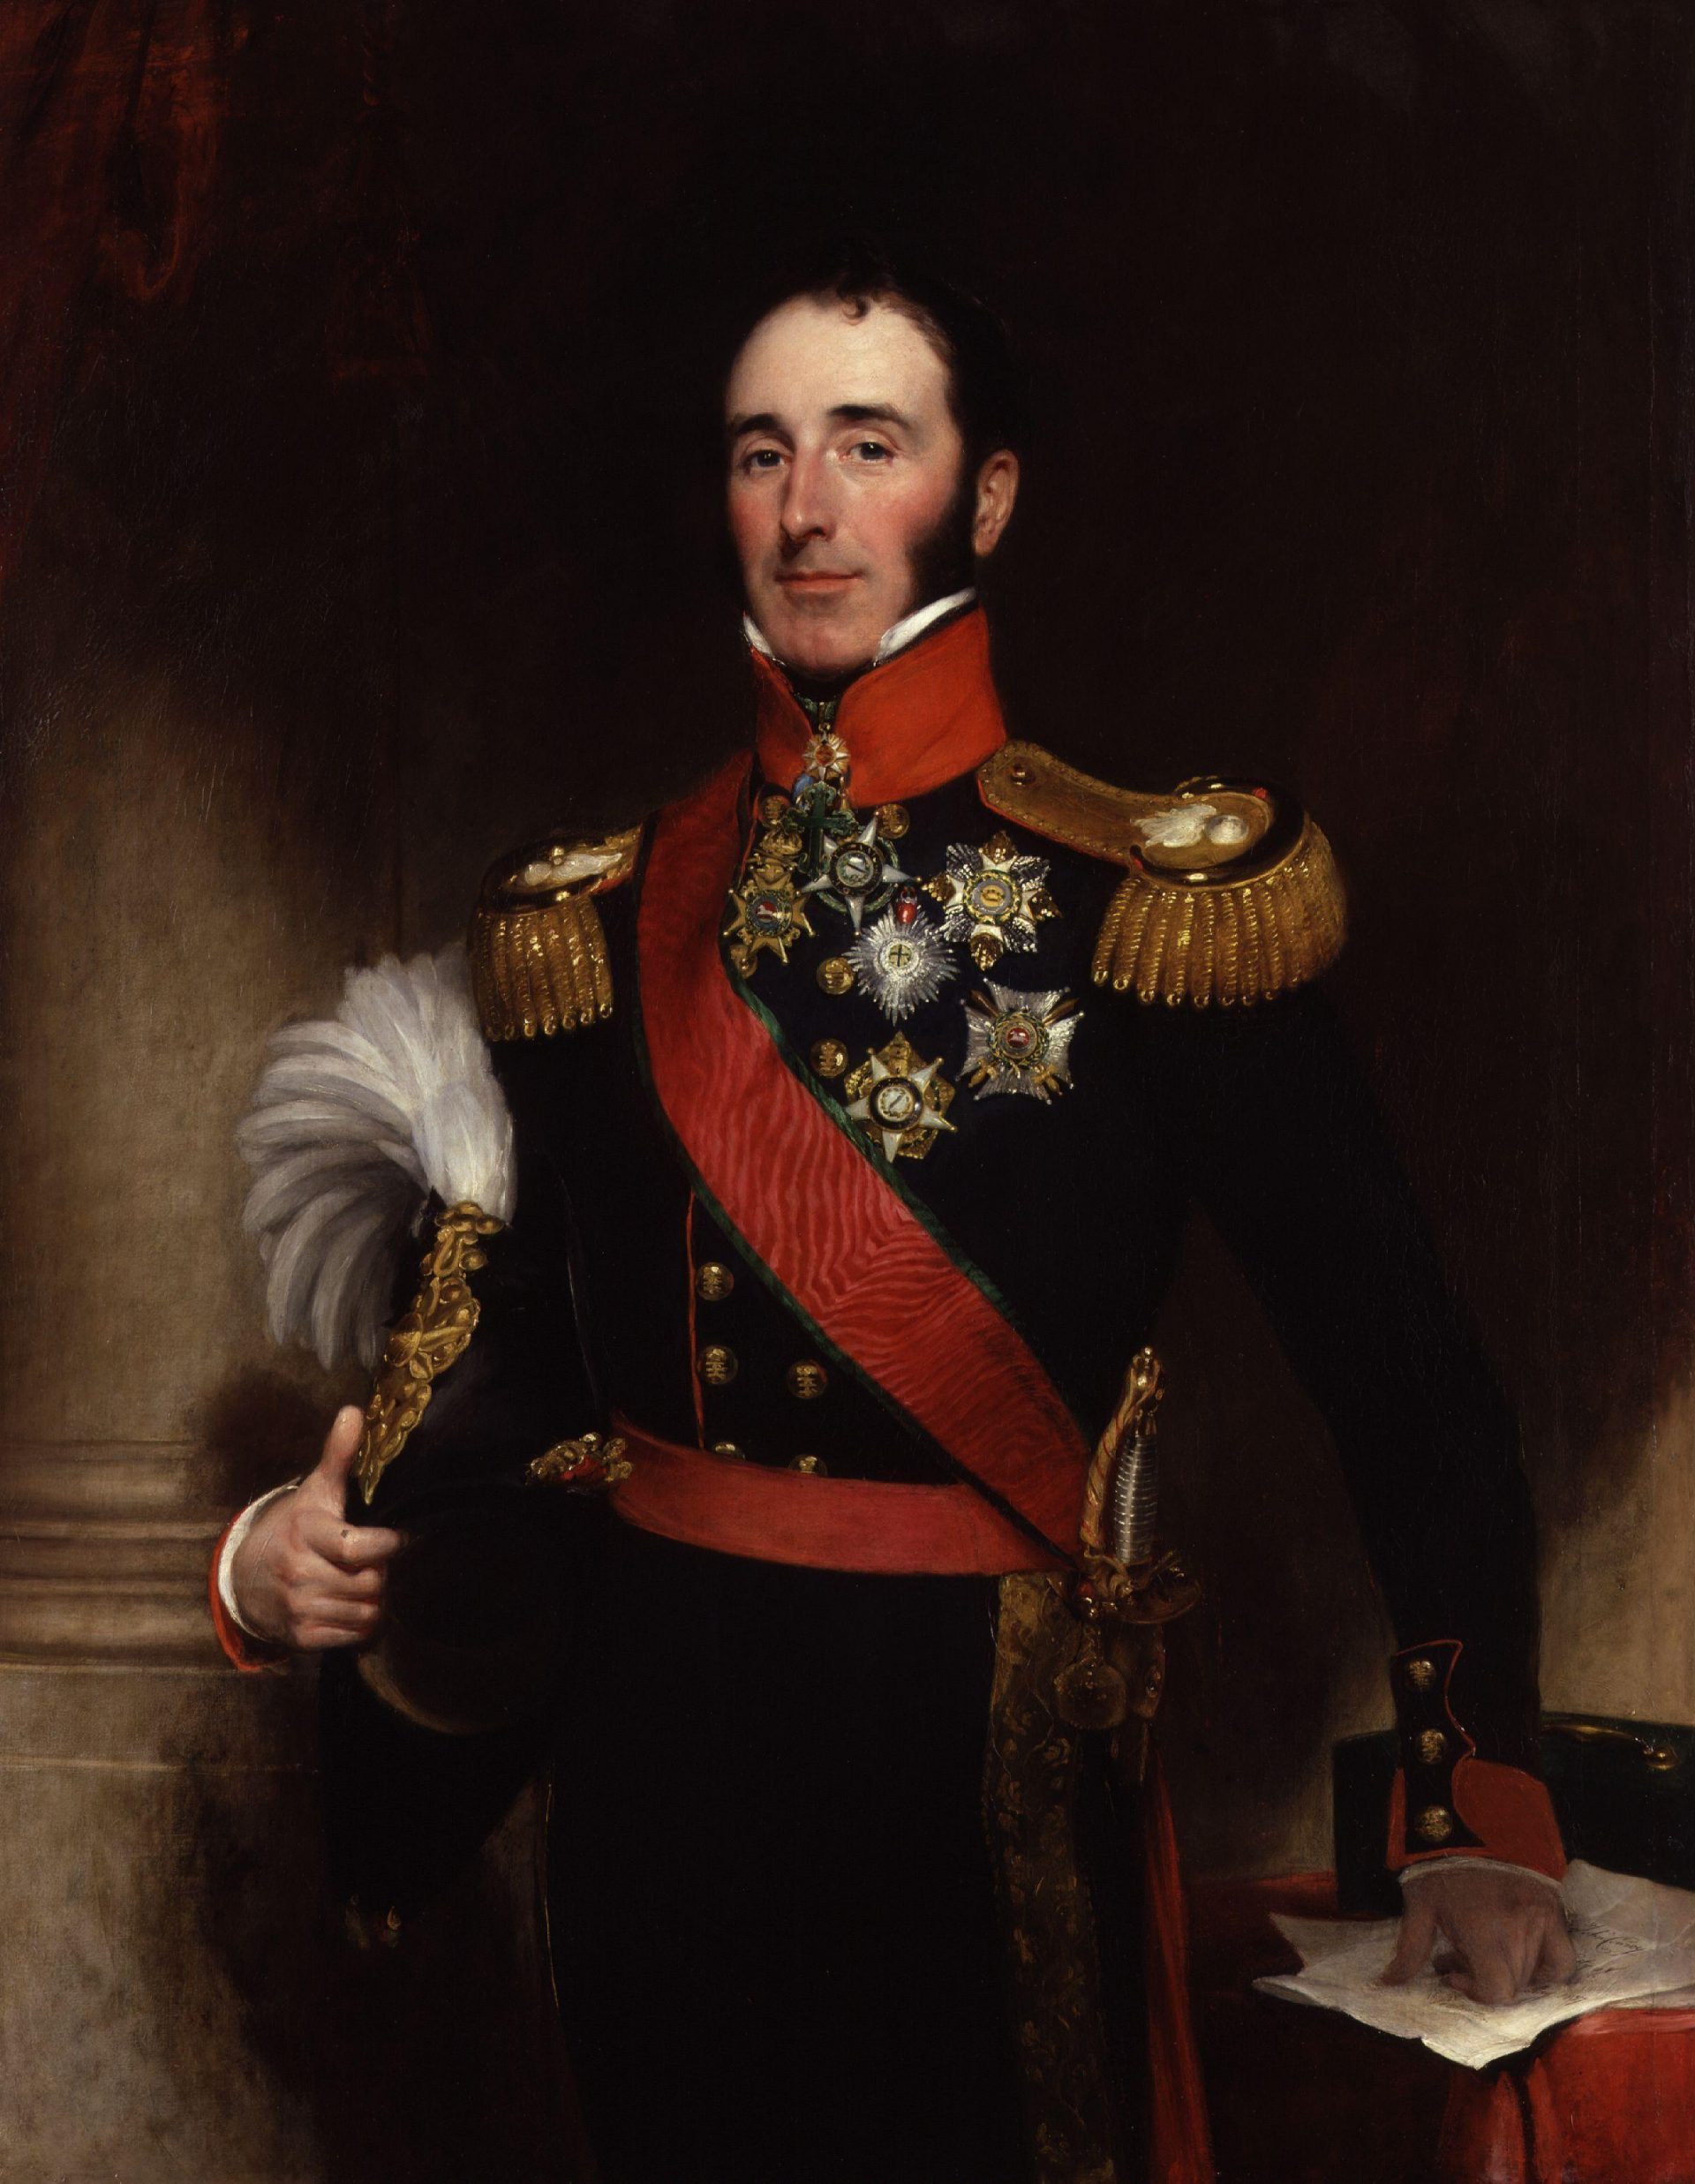 A portrait of Sir John Conroy, wearing a 19th century British military uniform. He is a man in his 30s with large sideburns. He is holding a hat with a feather under his arm. He has a sword attached to his side. His uniform is covered in medals.